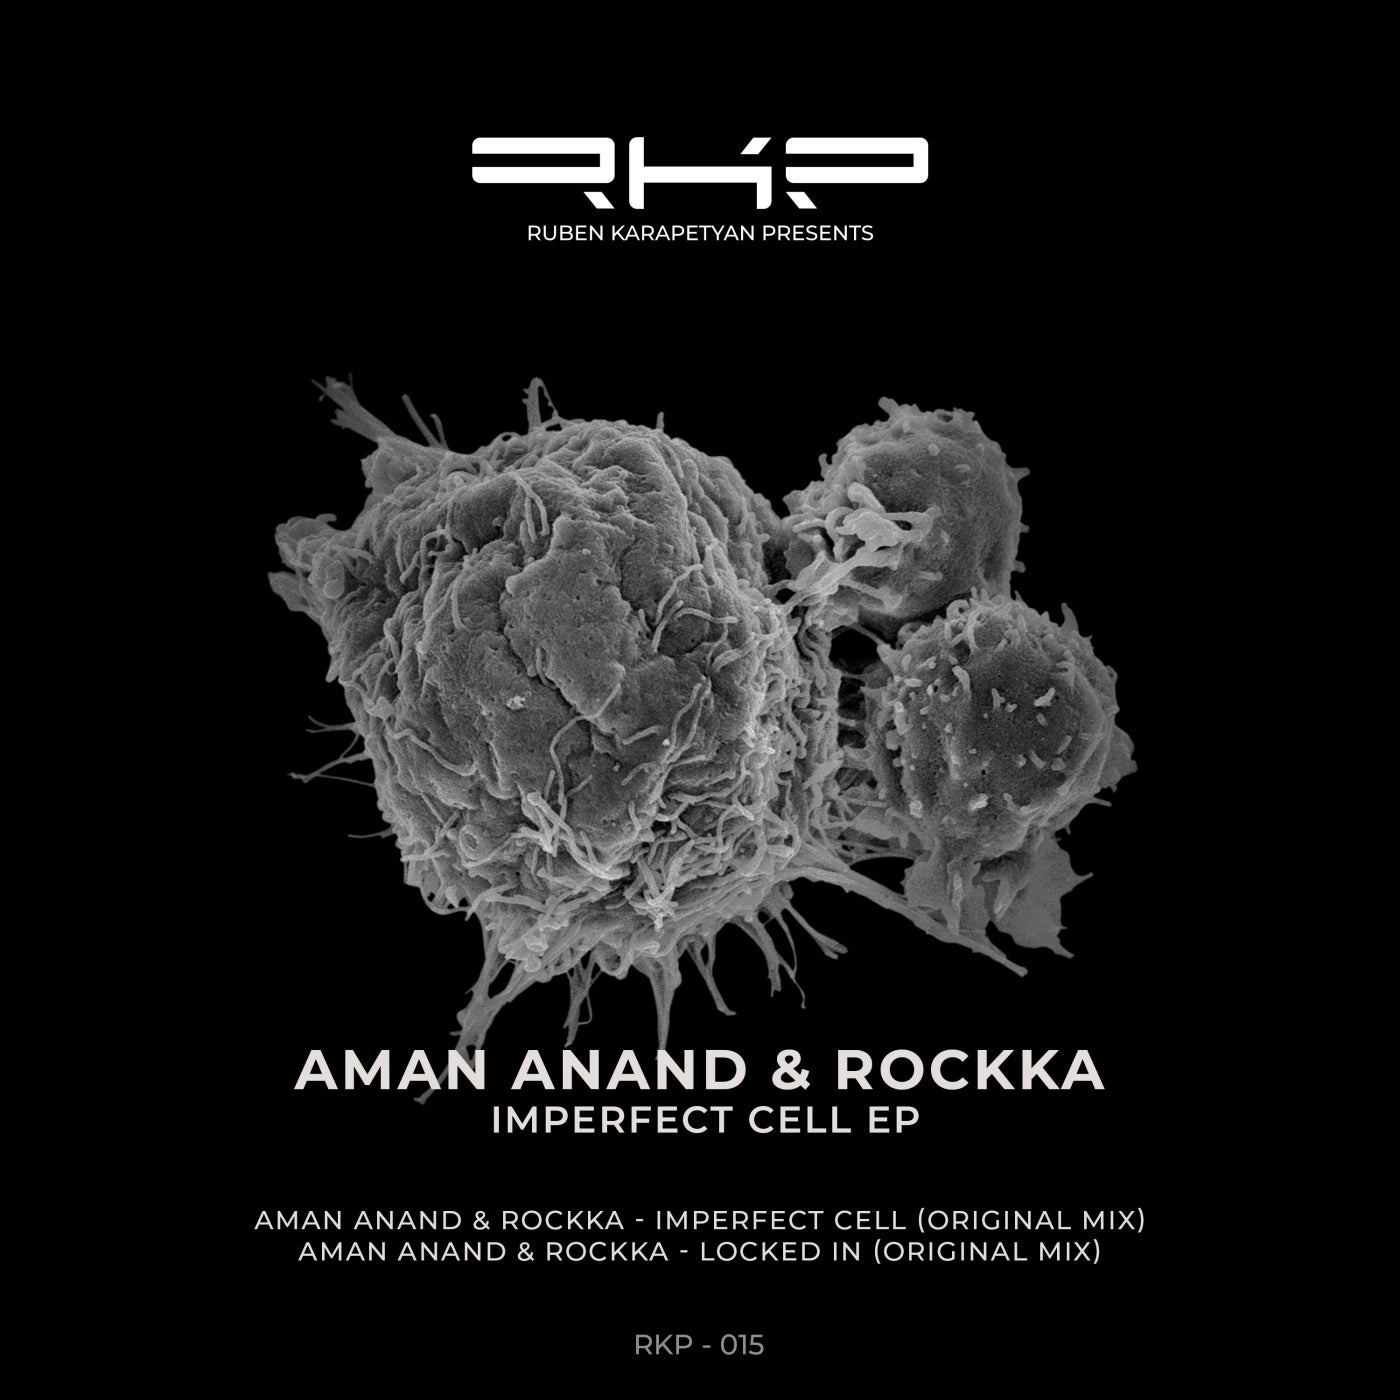 Cover - Aman Anand, Rockka - Imperfect Cell (Original Mix)